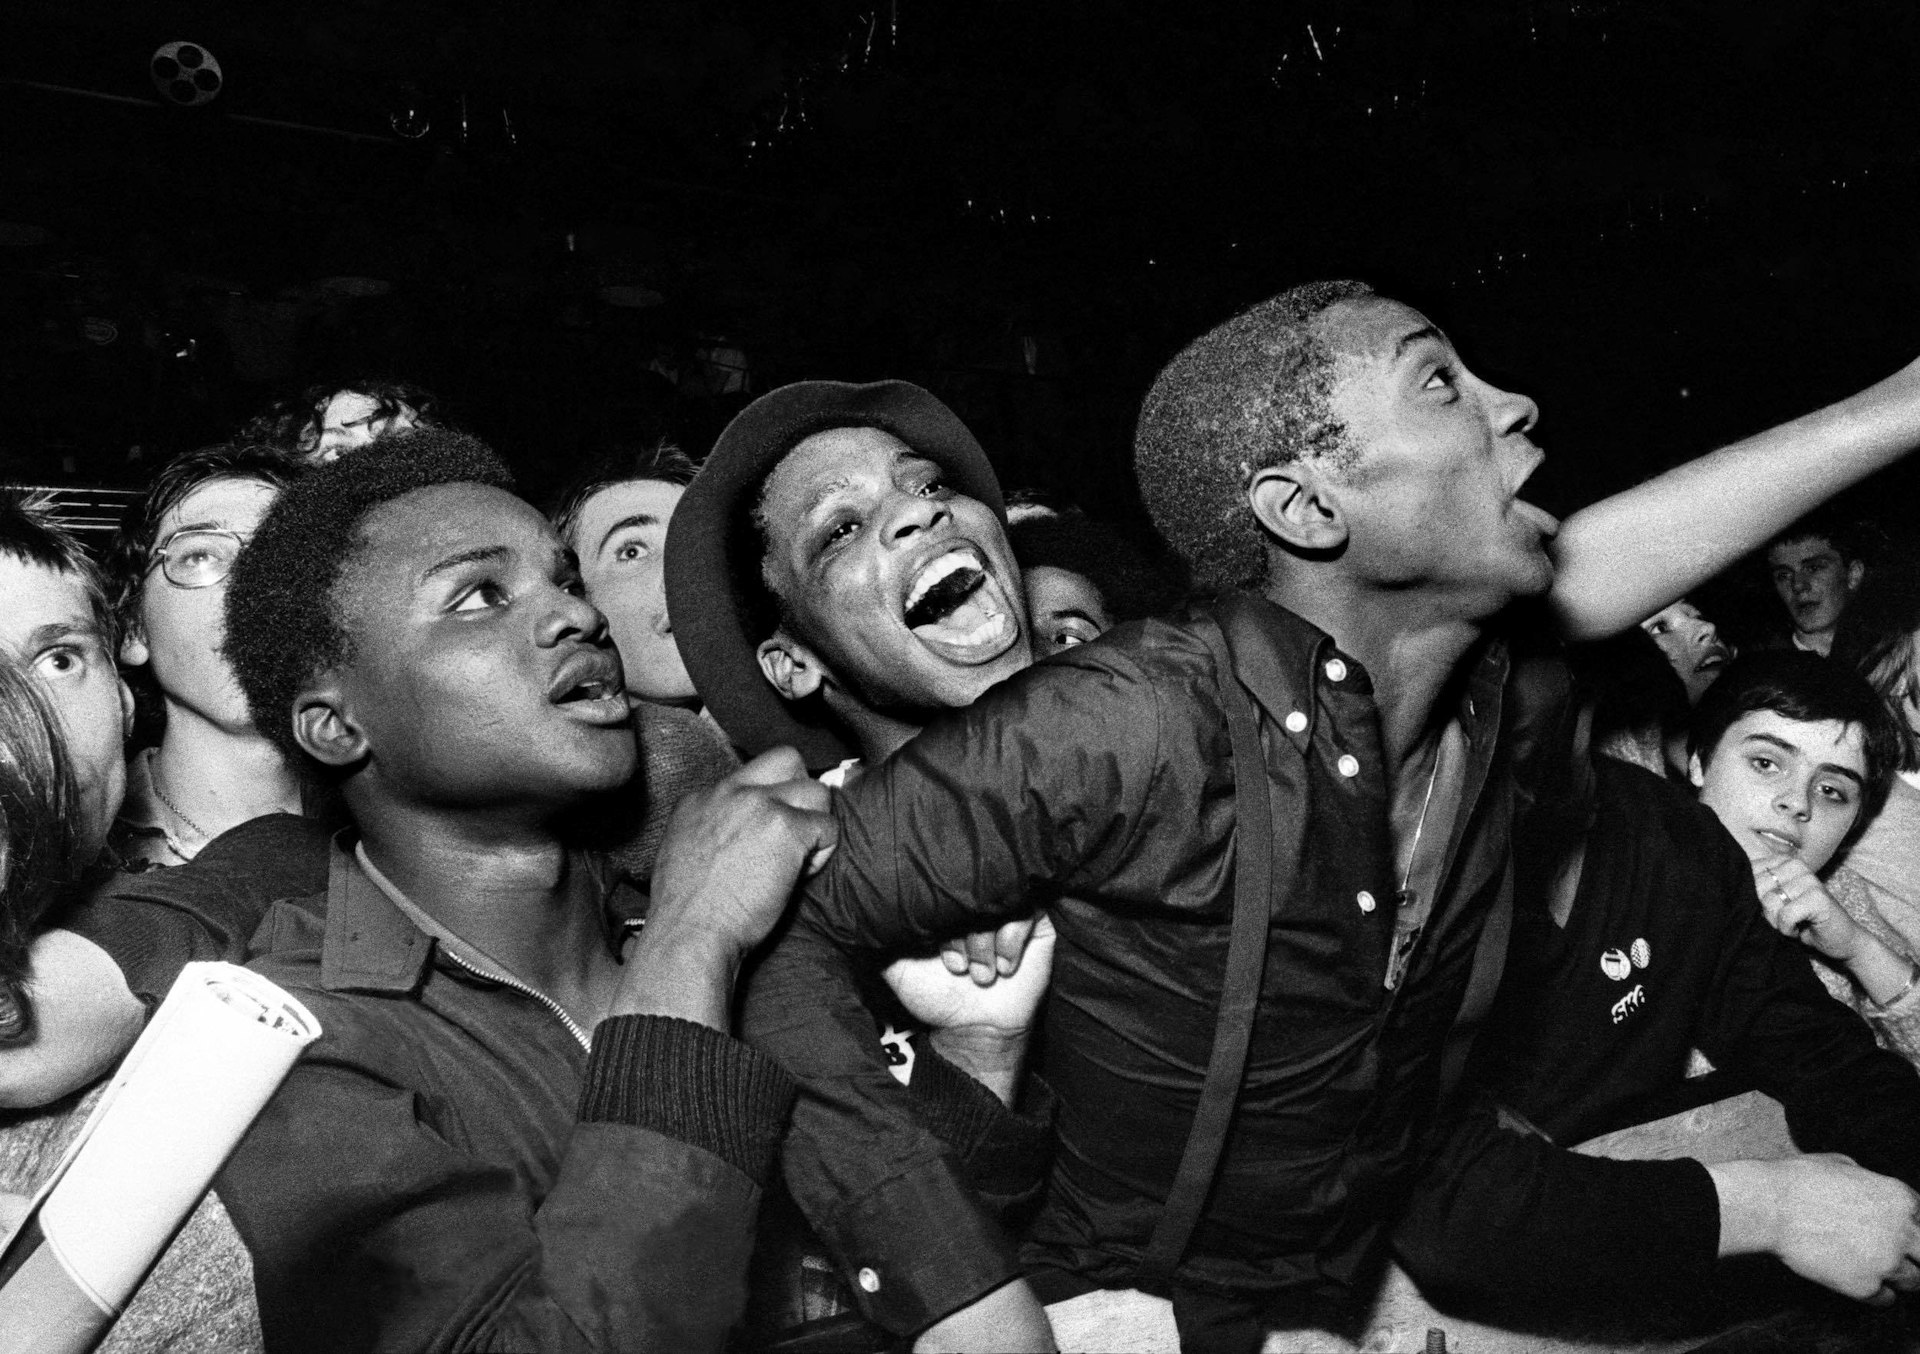 Syd Shelton's iconic images document Rock Against Racism from the inside